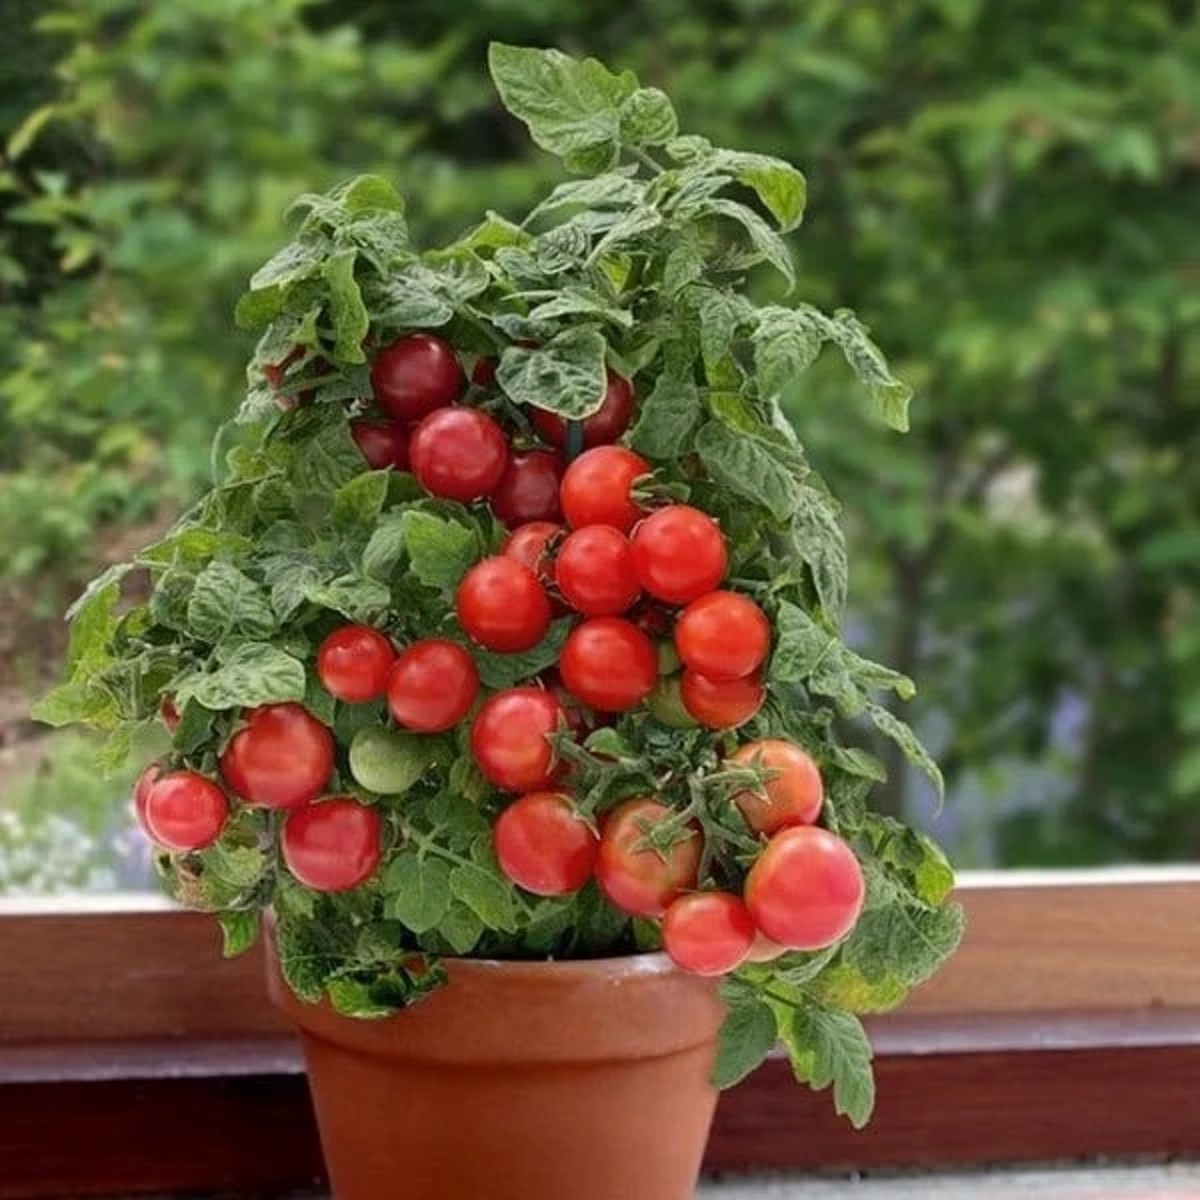 Growing Vegetables In Your Own Window Sill Garden